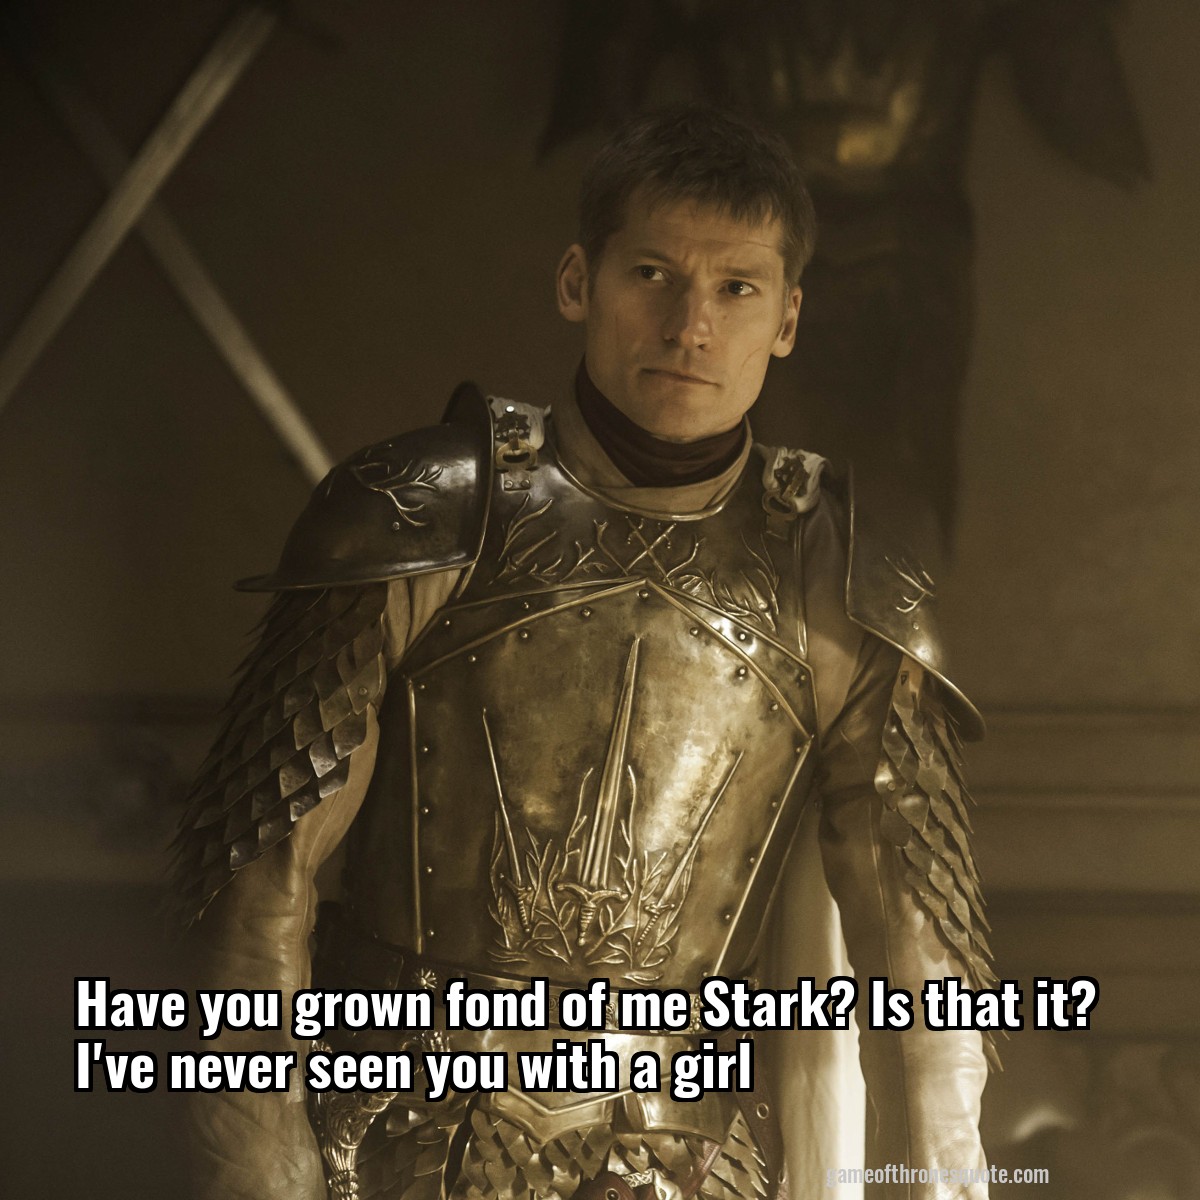 Have you grown fond of me Stark? Is that it? I've never seen you with a girl